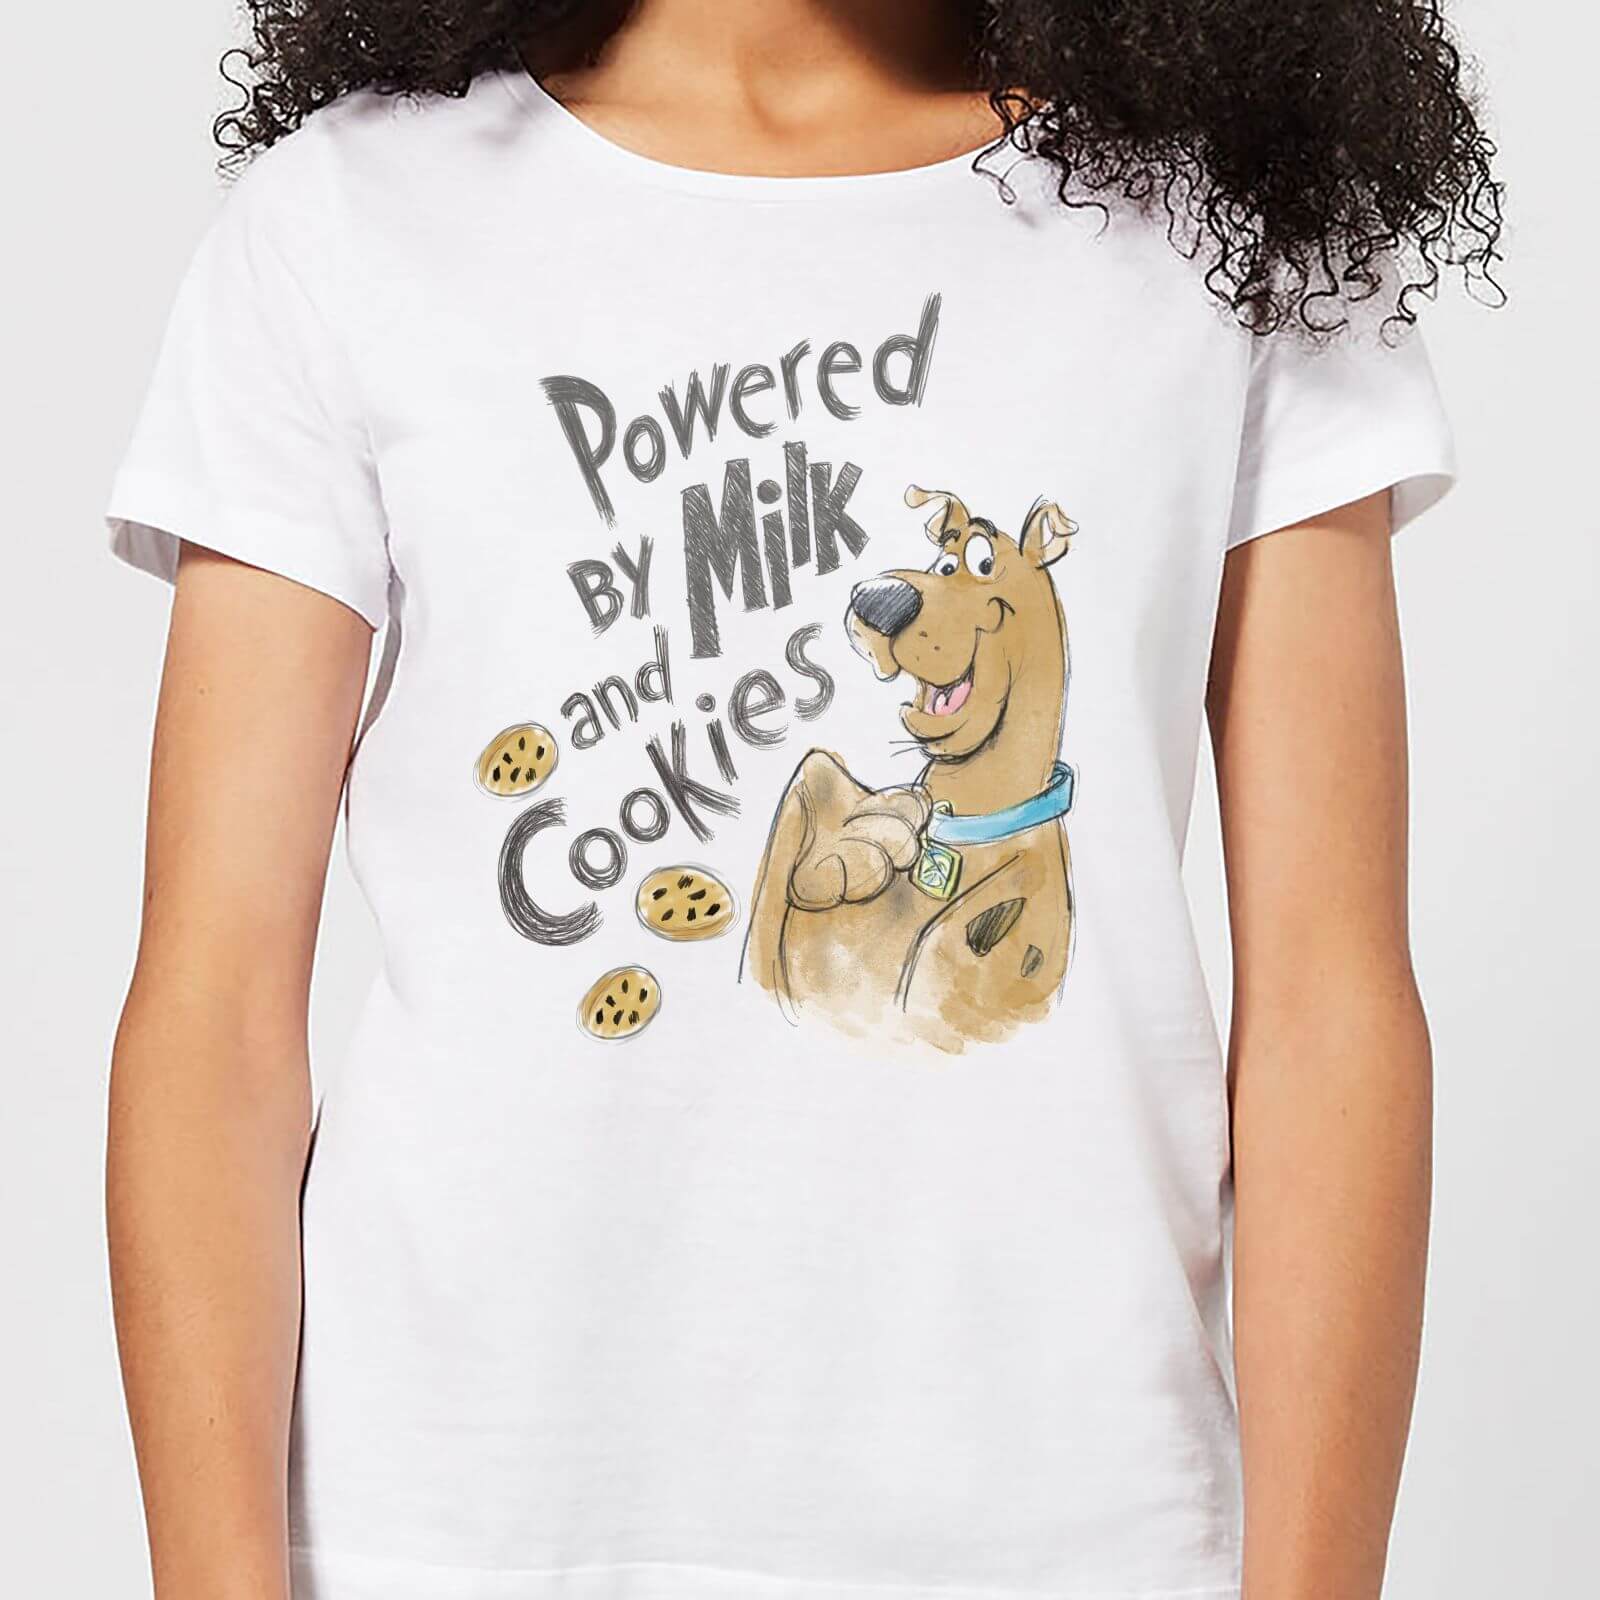 Scooby Doo Powered By Milk And Cookies Women's T-Shirt - White - S